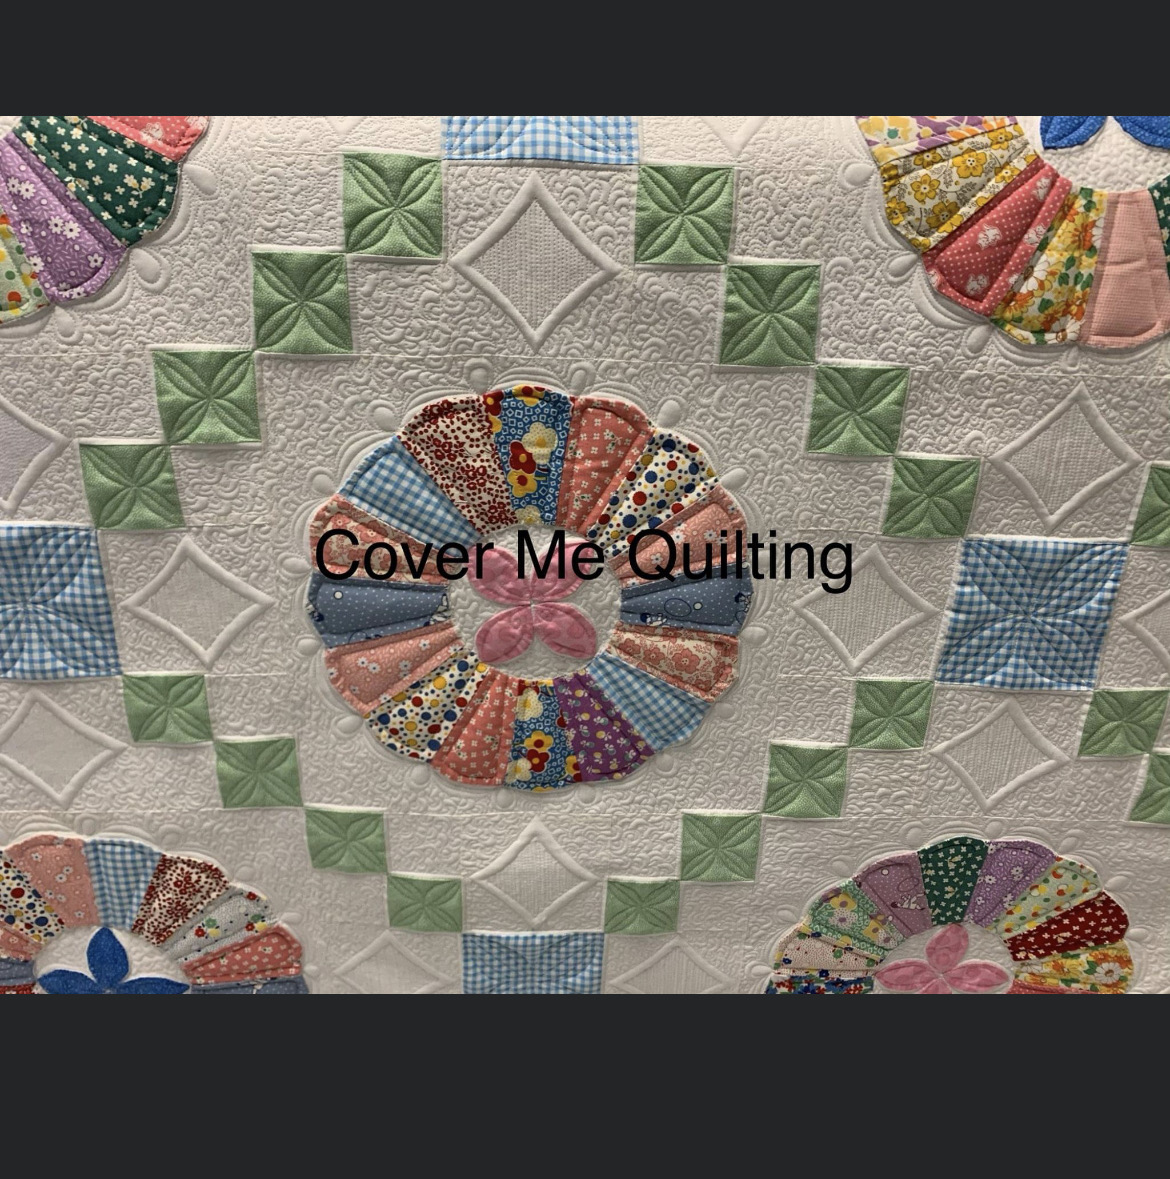 Shawna McPherson, Cover Me Quilting